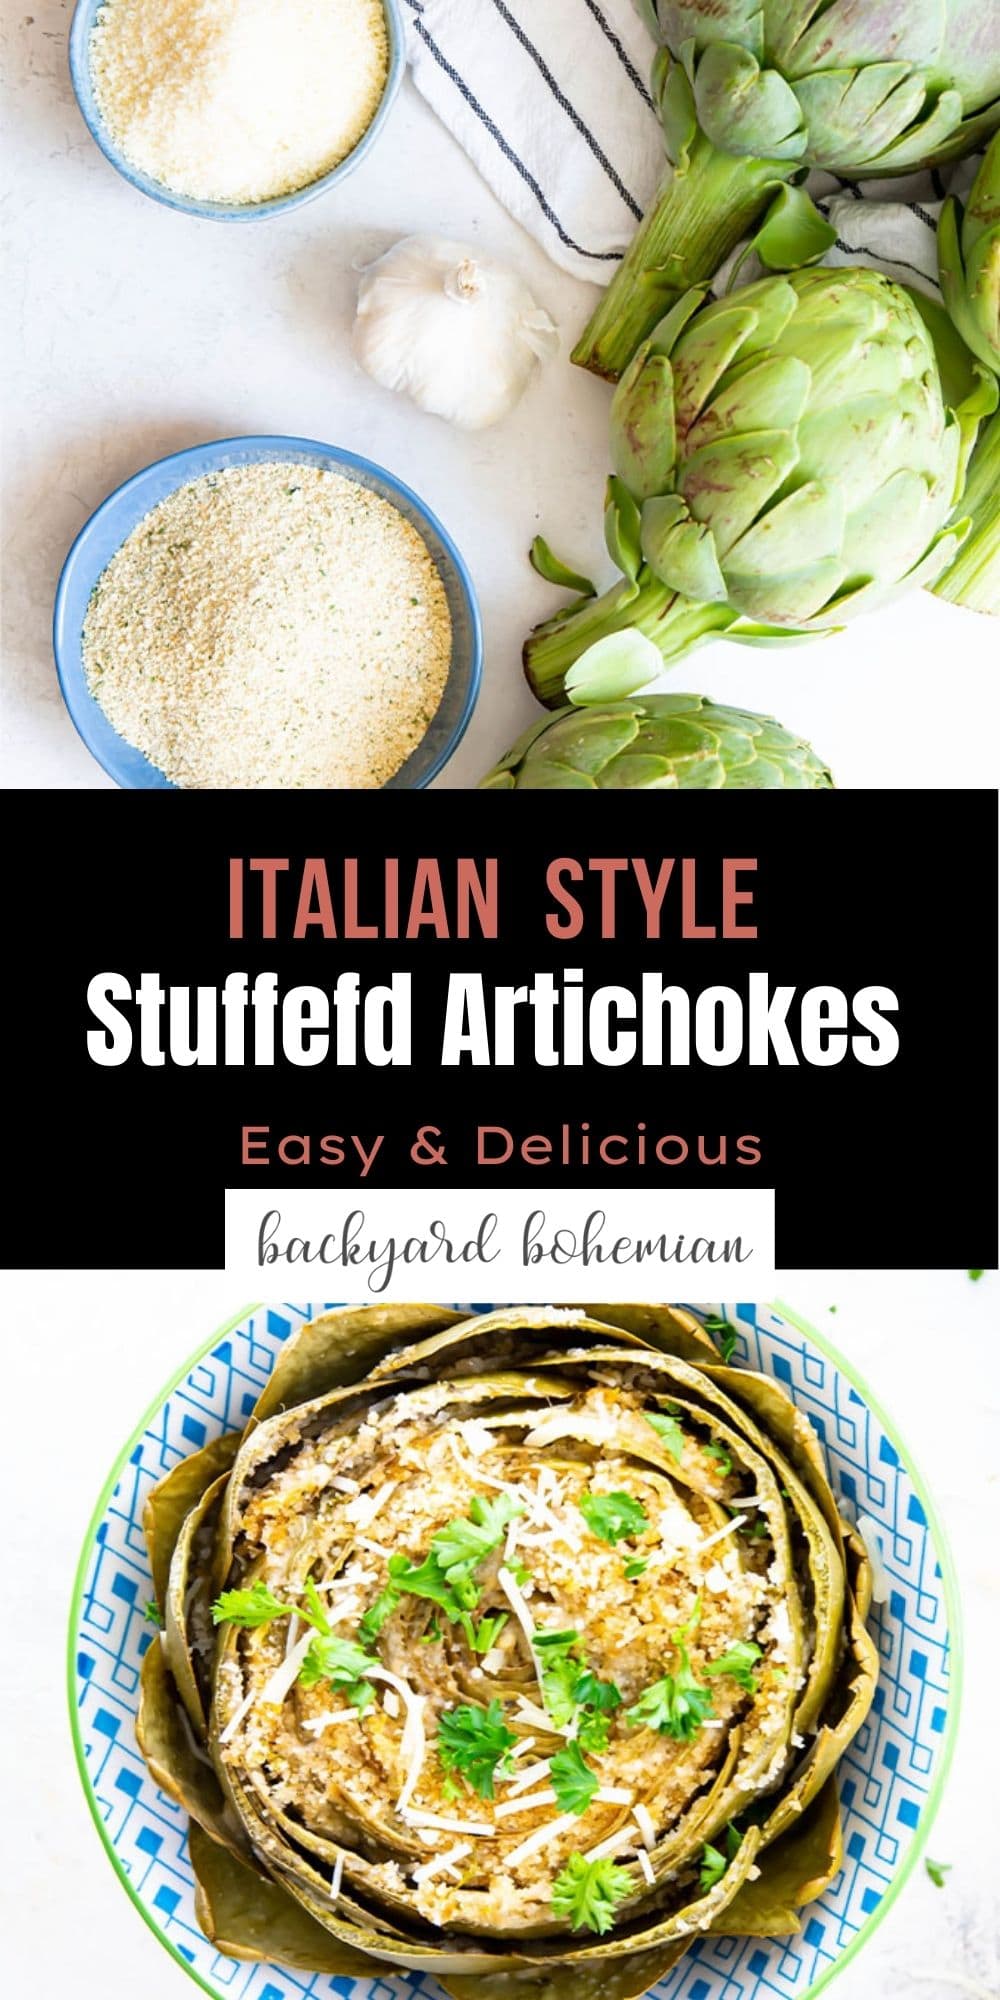 Italian stuffed artichokes are made with simple, healthy ingredients and are ready in under 1 hour. These stuffed artichokes can be made on the stovetop or the Instant Pot!